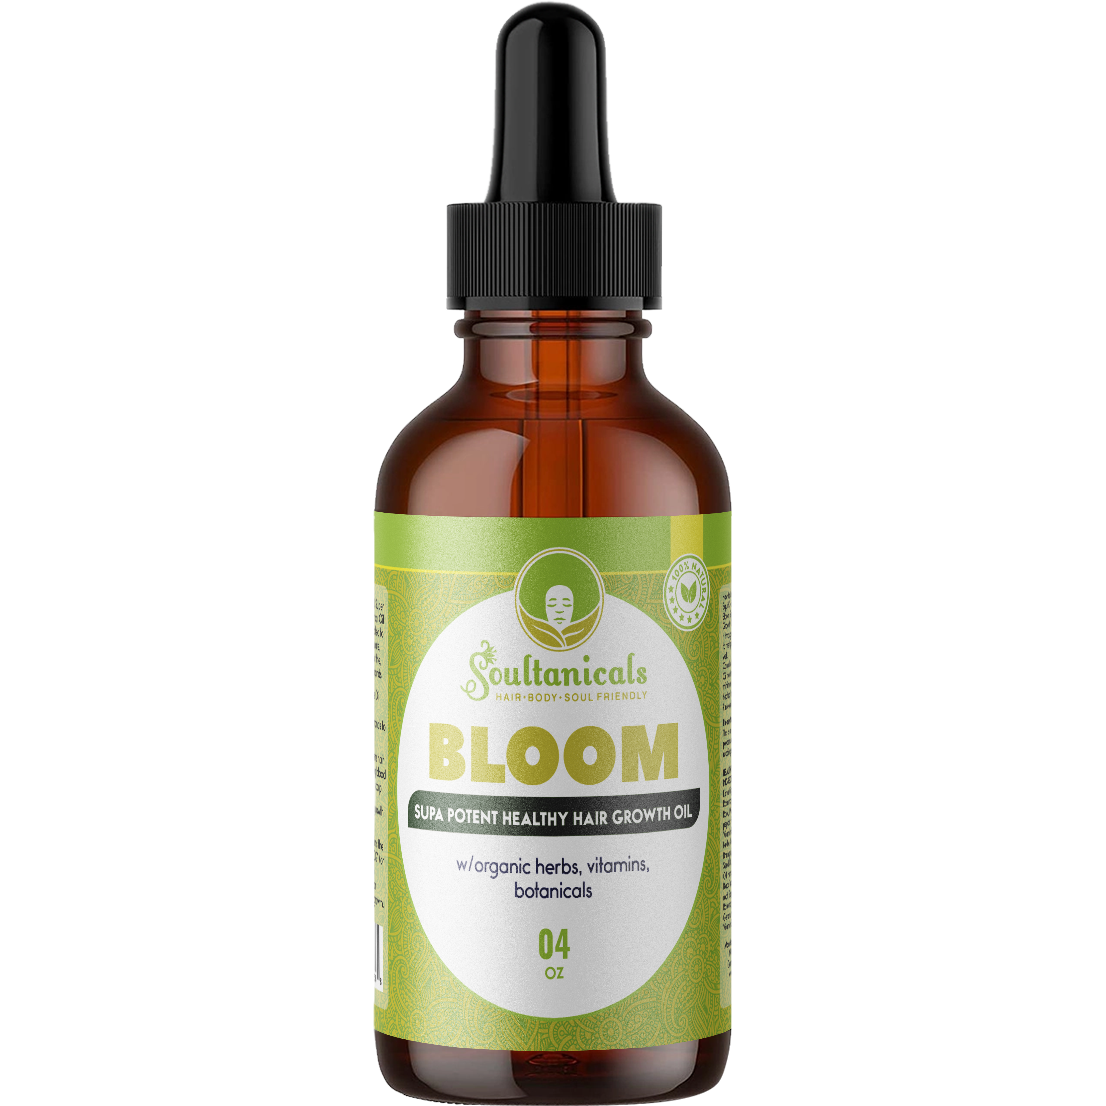 Bloom- Supa Potent Healthy Hair Growth Oil (Dropper Bottle)